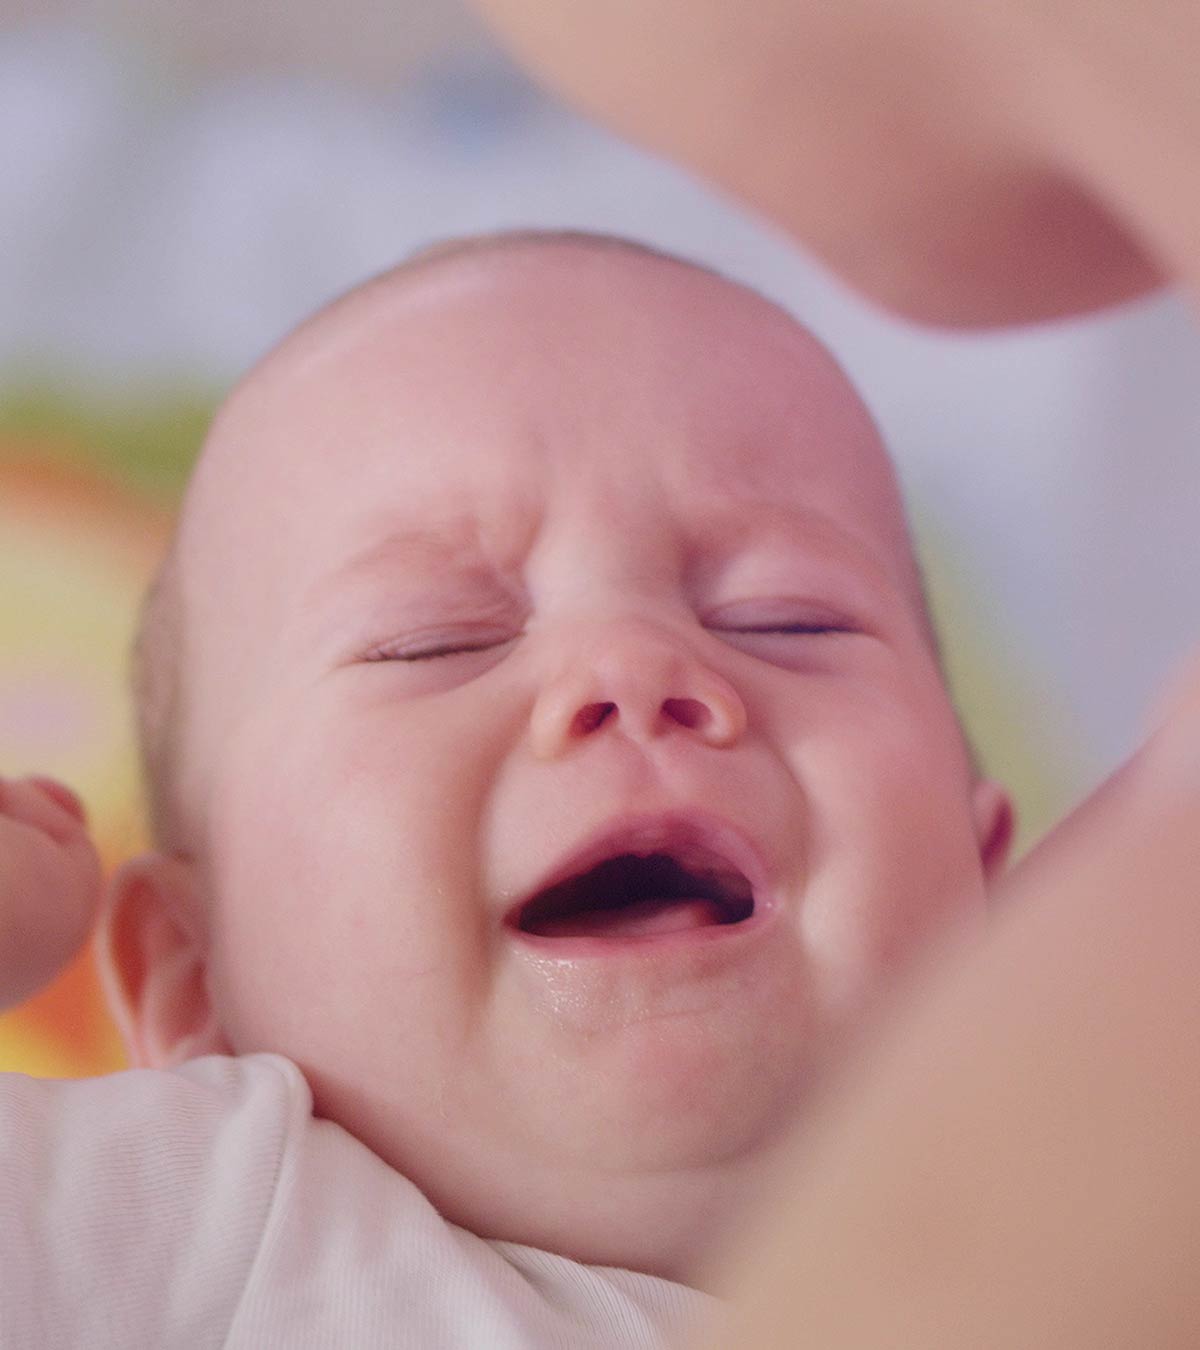 20 Reasons Why Baby Fusses Or Cries While Breastfeeding